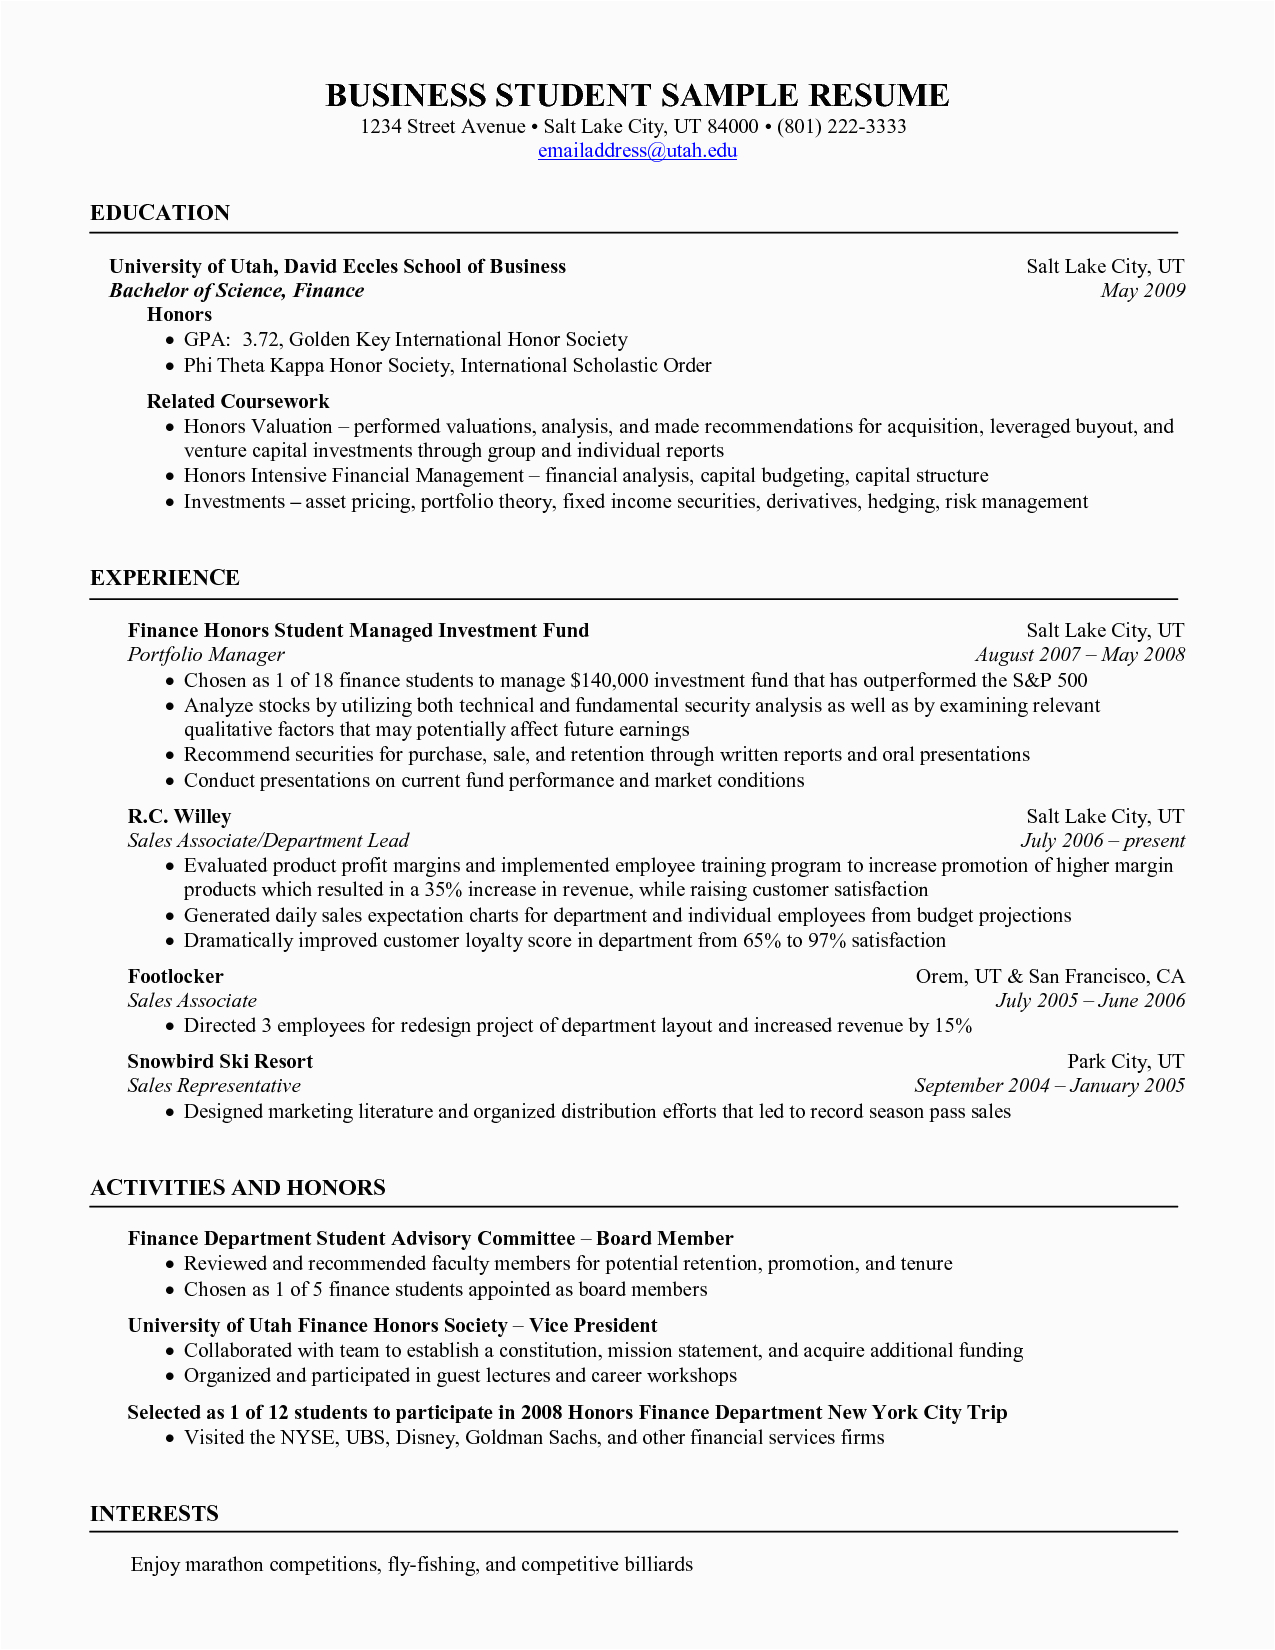 Resume Samples for International Students In Canada Stockroom Manager Resume O